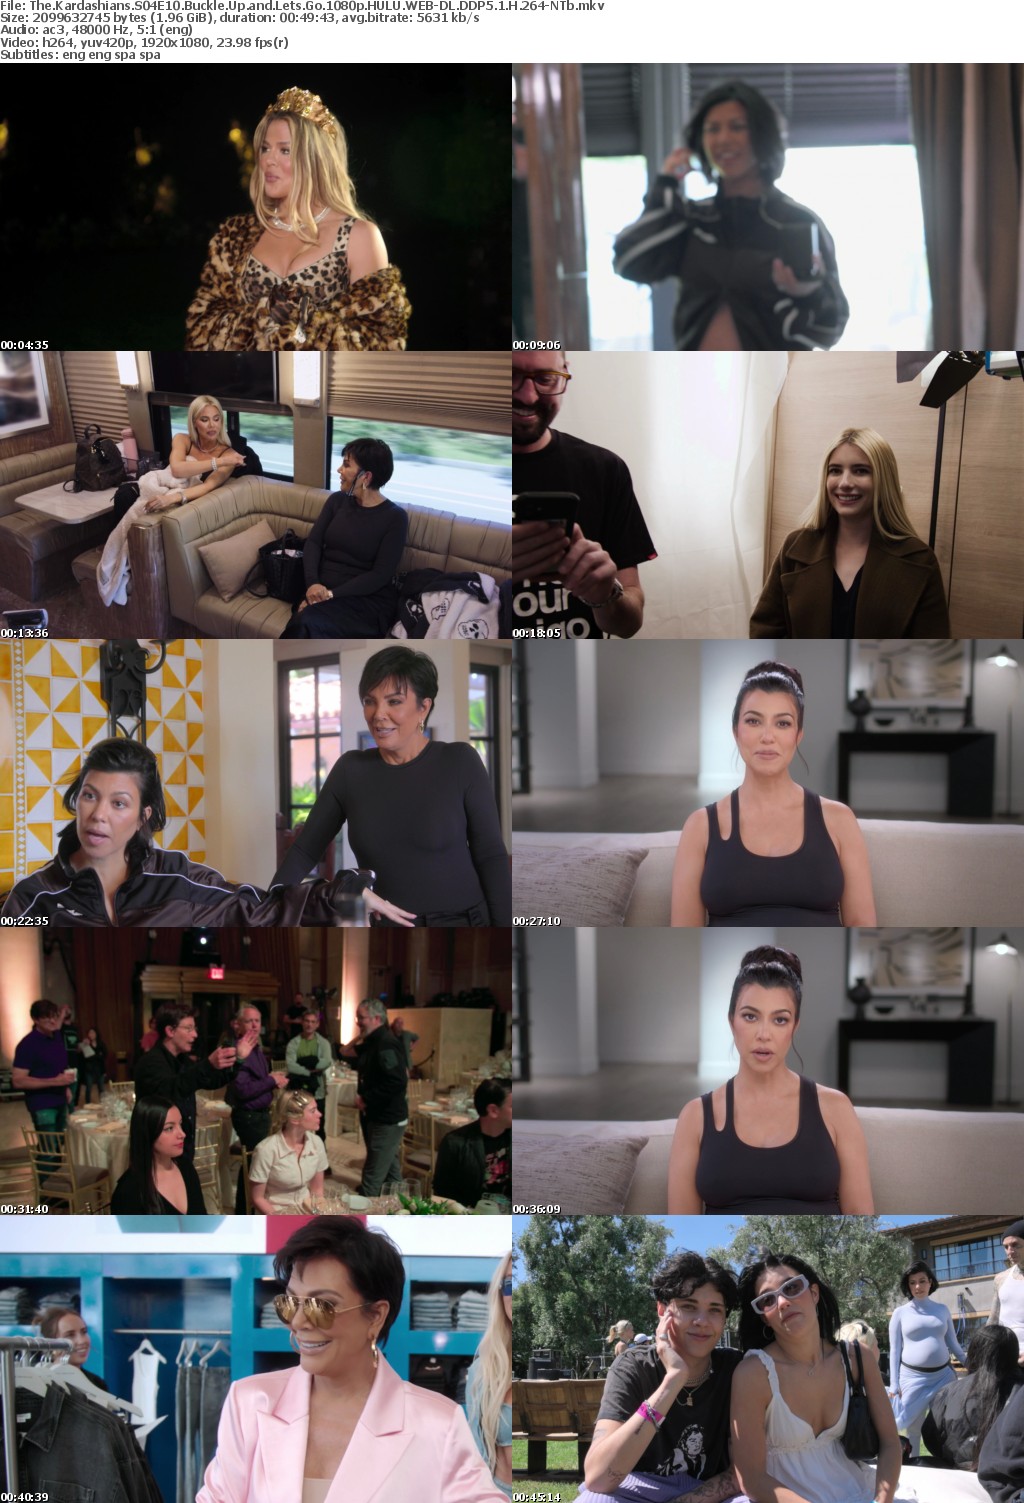 The Kardashians S04E10 Buckle Up and Lets Go 1080p HULU WEB-DL DDP5 1 H 264-NTb